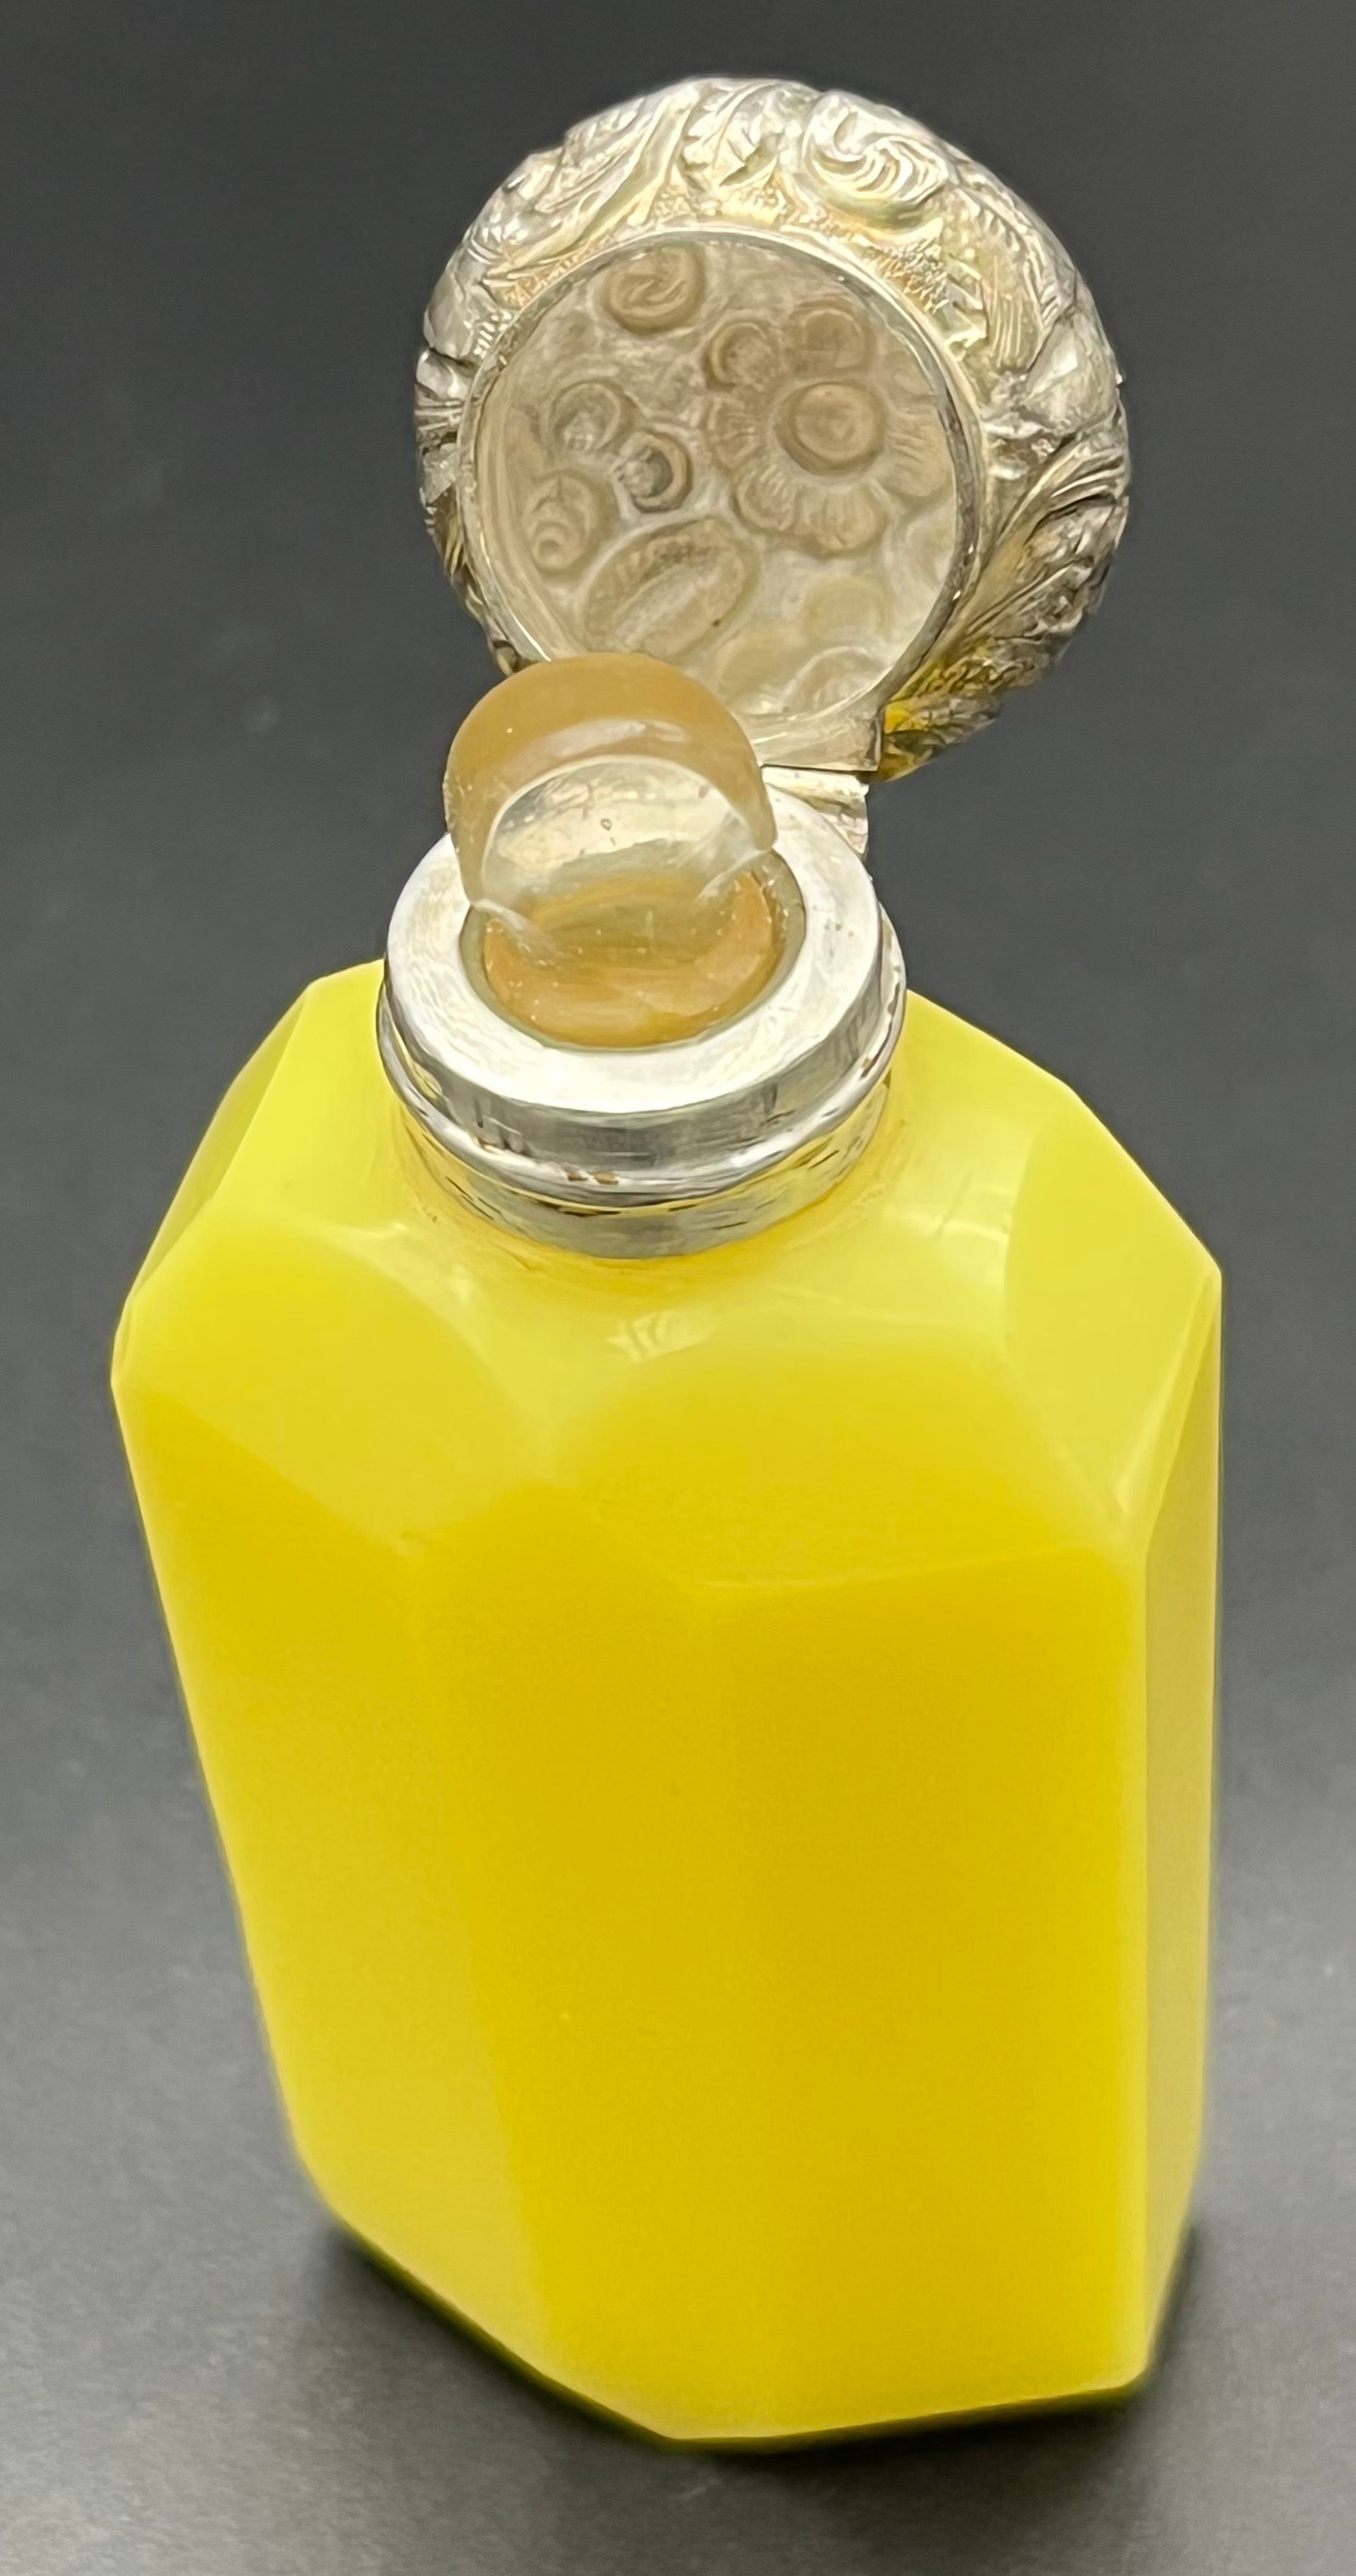 Antique 19th century facet cut glass/ yellow stone perfume bottle fitted with a silver top. Has - Image 3 of 3